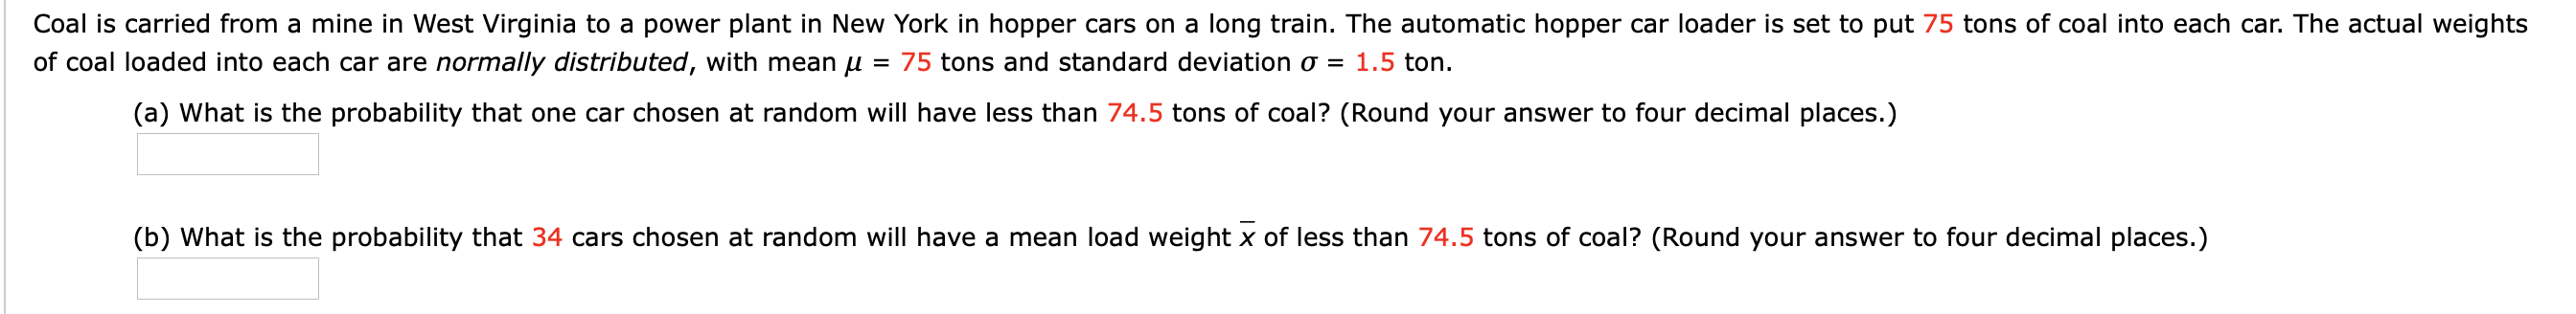 Coal is carried from a mine in West Virginia to a power plant in New York in hopper cars on a long train. The automatic hopper car loader is set to put 75 tons of coal into each car. The actual weights
1.5 ton.
of coal loaded into each car are normally distributed, with mean u
75 tons and standard deviation o =
(a) What is the probability that one car chosen at random will have less than 74.5 tons of coal? (Round your answer to four decimal places.)
(b) What is the probability that 34 cars chosen at random will have a mean load weight x of less than 74.5 tons of coal? (Round your answer to four decimal places.)
